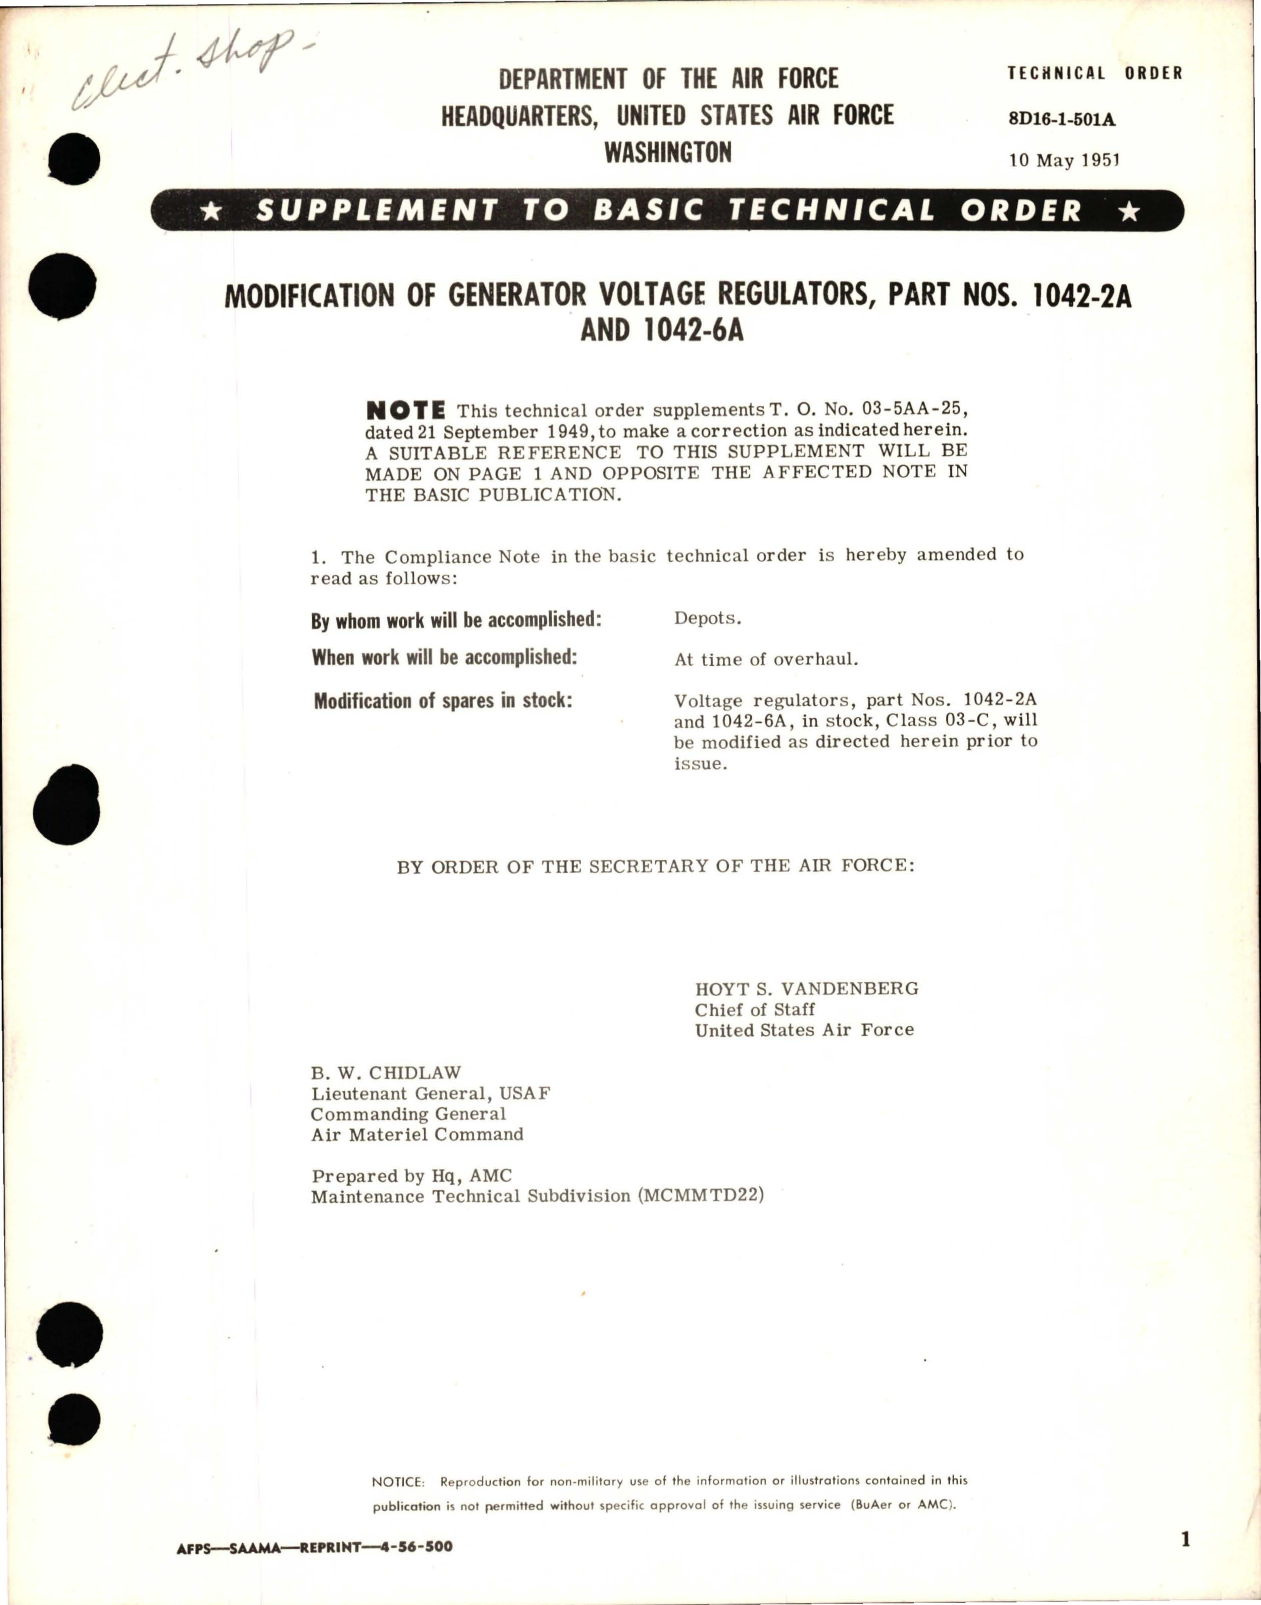 Sample page 1 from AirCorps Library document: Supplement to Modification of Generator Voltage Regulators - Parts 1042-2A and 1042-6A